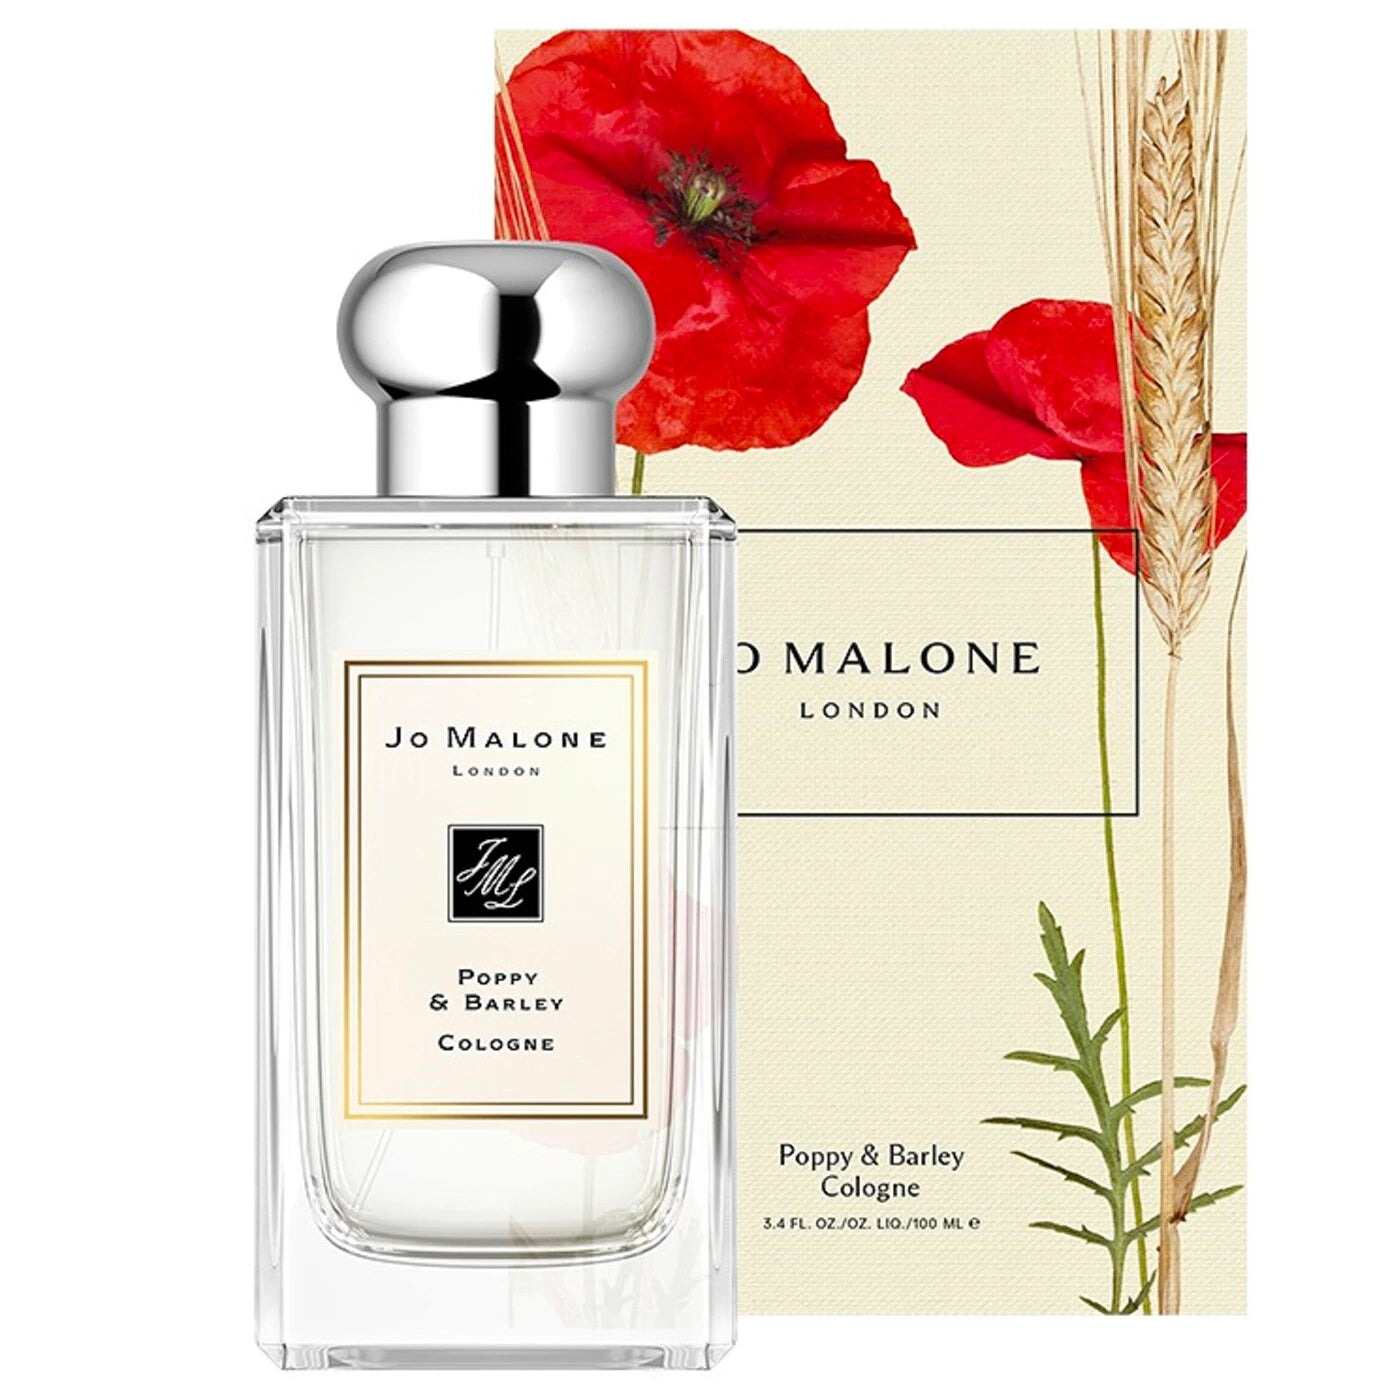 <p data-mce-fragment="1">Experience the iconic beauty of vibrant poppies dancing in England's meadows with Jo Malone London's Poppy &amp; Barley Cologne. Captivating scents of rose and violet mingle with succulent blackcurrants and notes of bran and cotton-soft barley. An enchanting blend of floral and earthy tones, this exclusive fragrance is designed to evoke the luxuriant harvest of England's fields. Receive your Jo Malone London Cologne delicately packaged in our signature box, and create a unique scent trail when you layer it with other fragrances.</p>